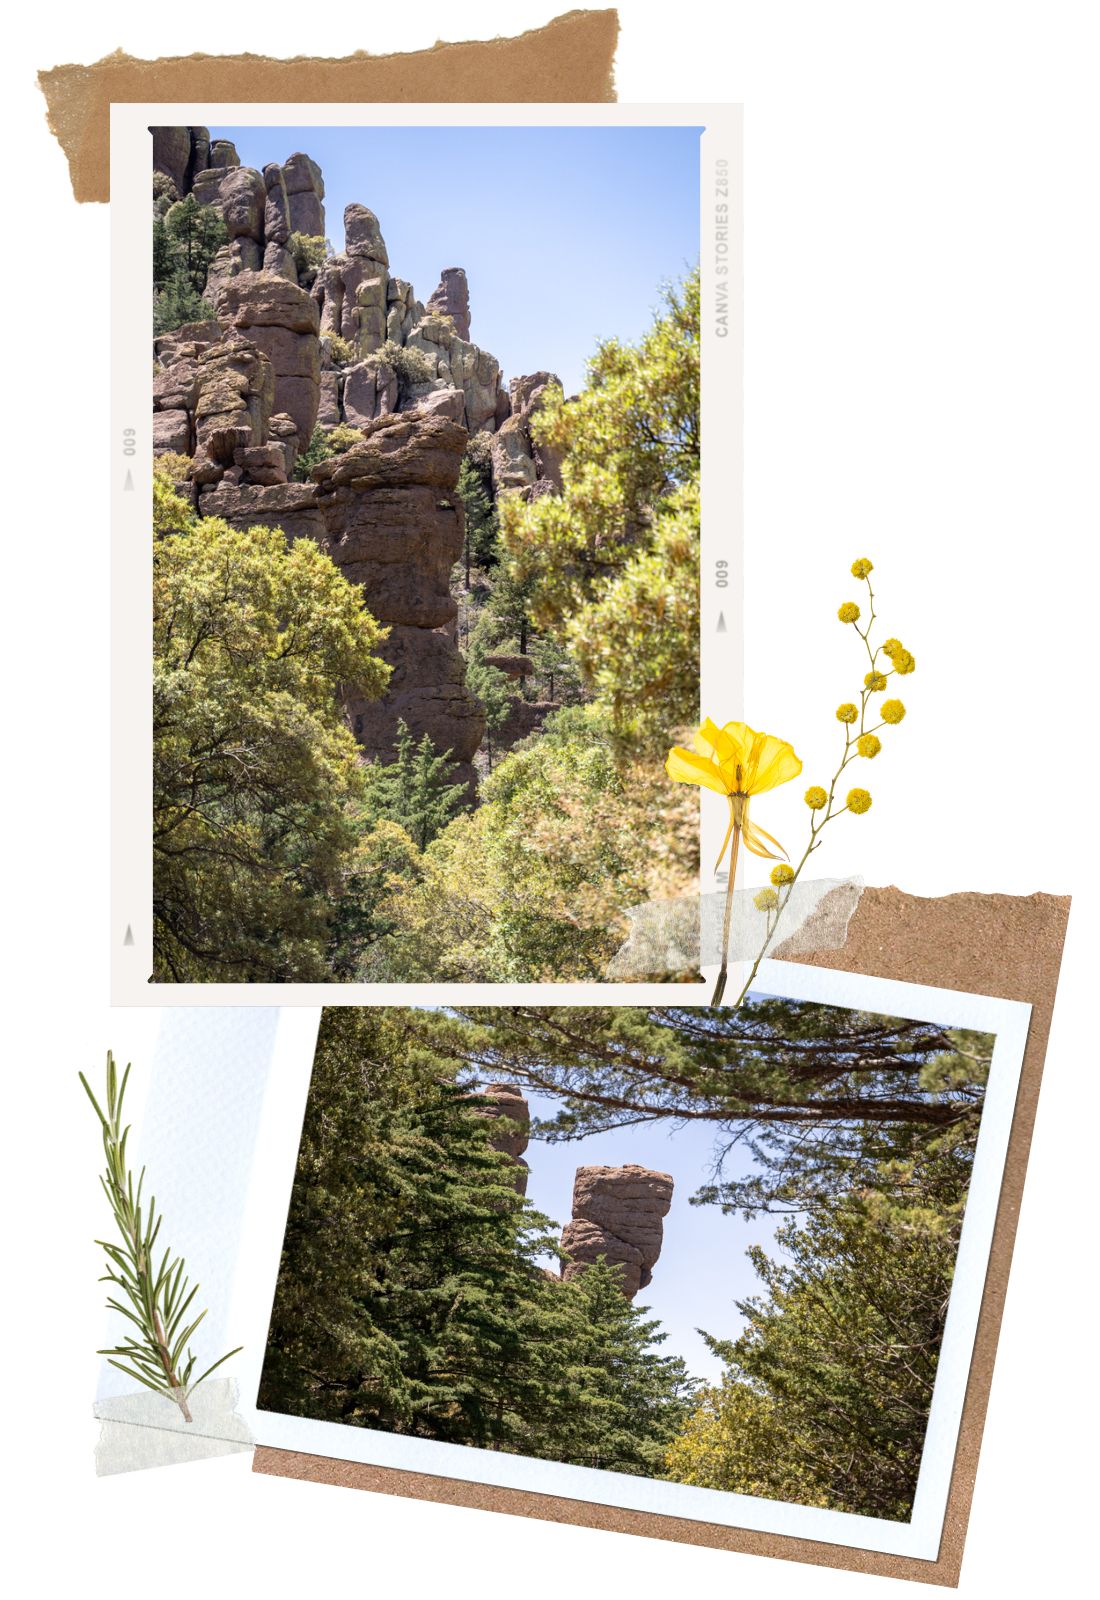 Sea Captain and China Boy Rock Formations - Complete Guide for the Scenic Drive in Chiricahua National Monument